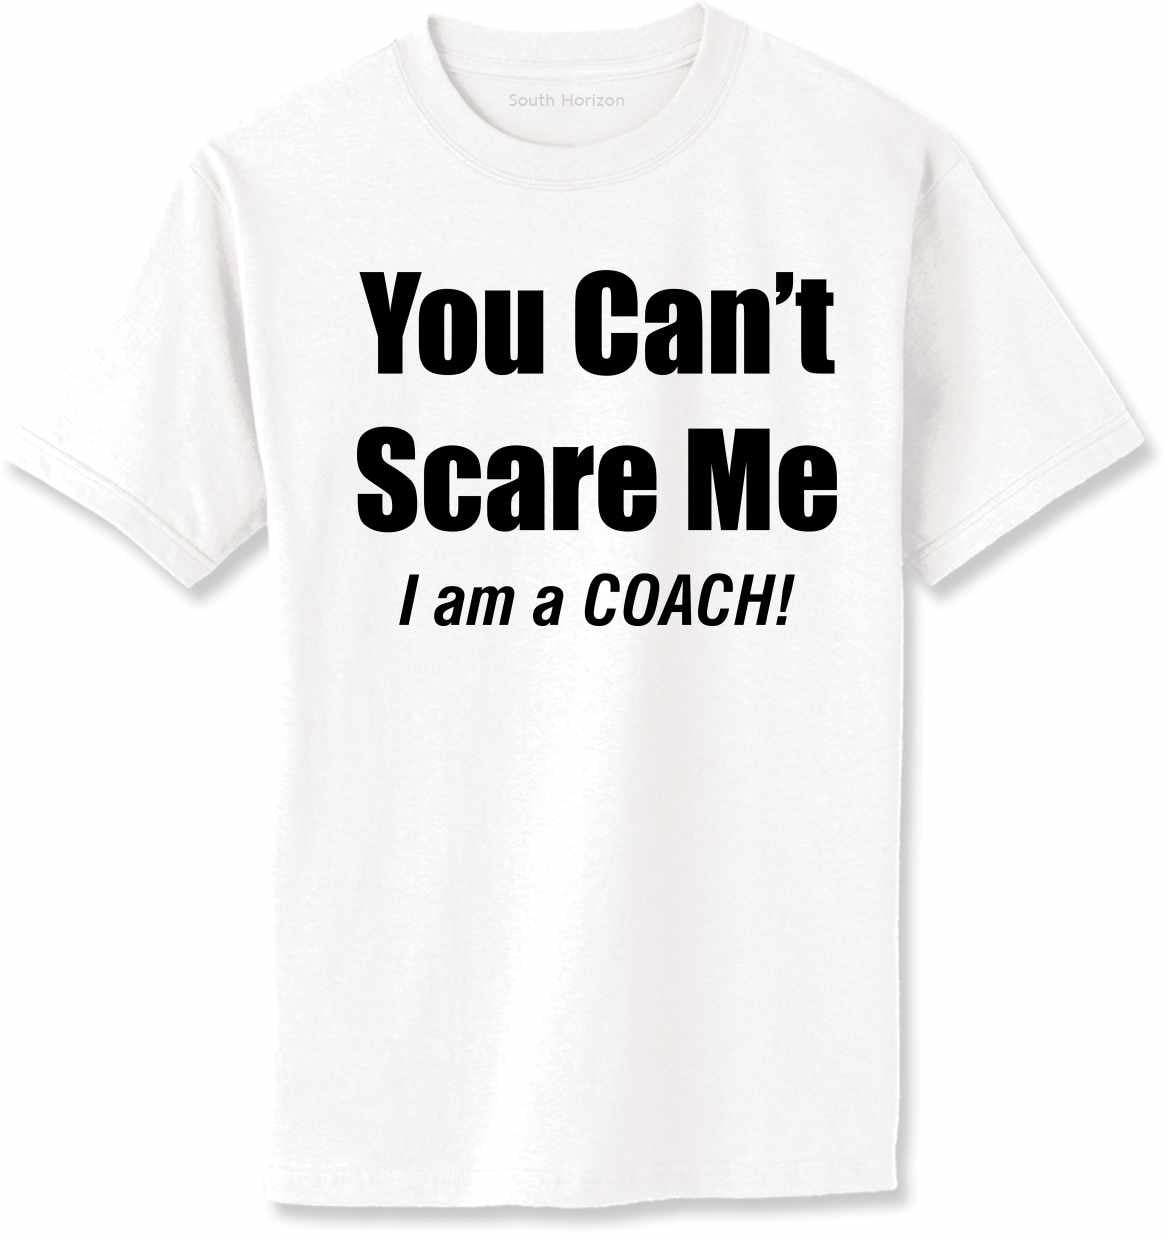 You Can't Scare Me, I'm a COACH Adult T-Shirt